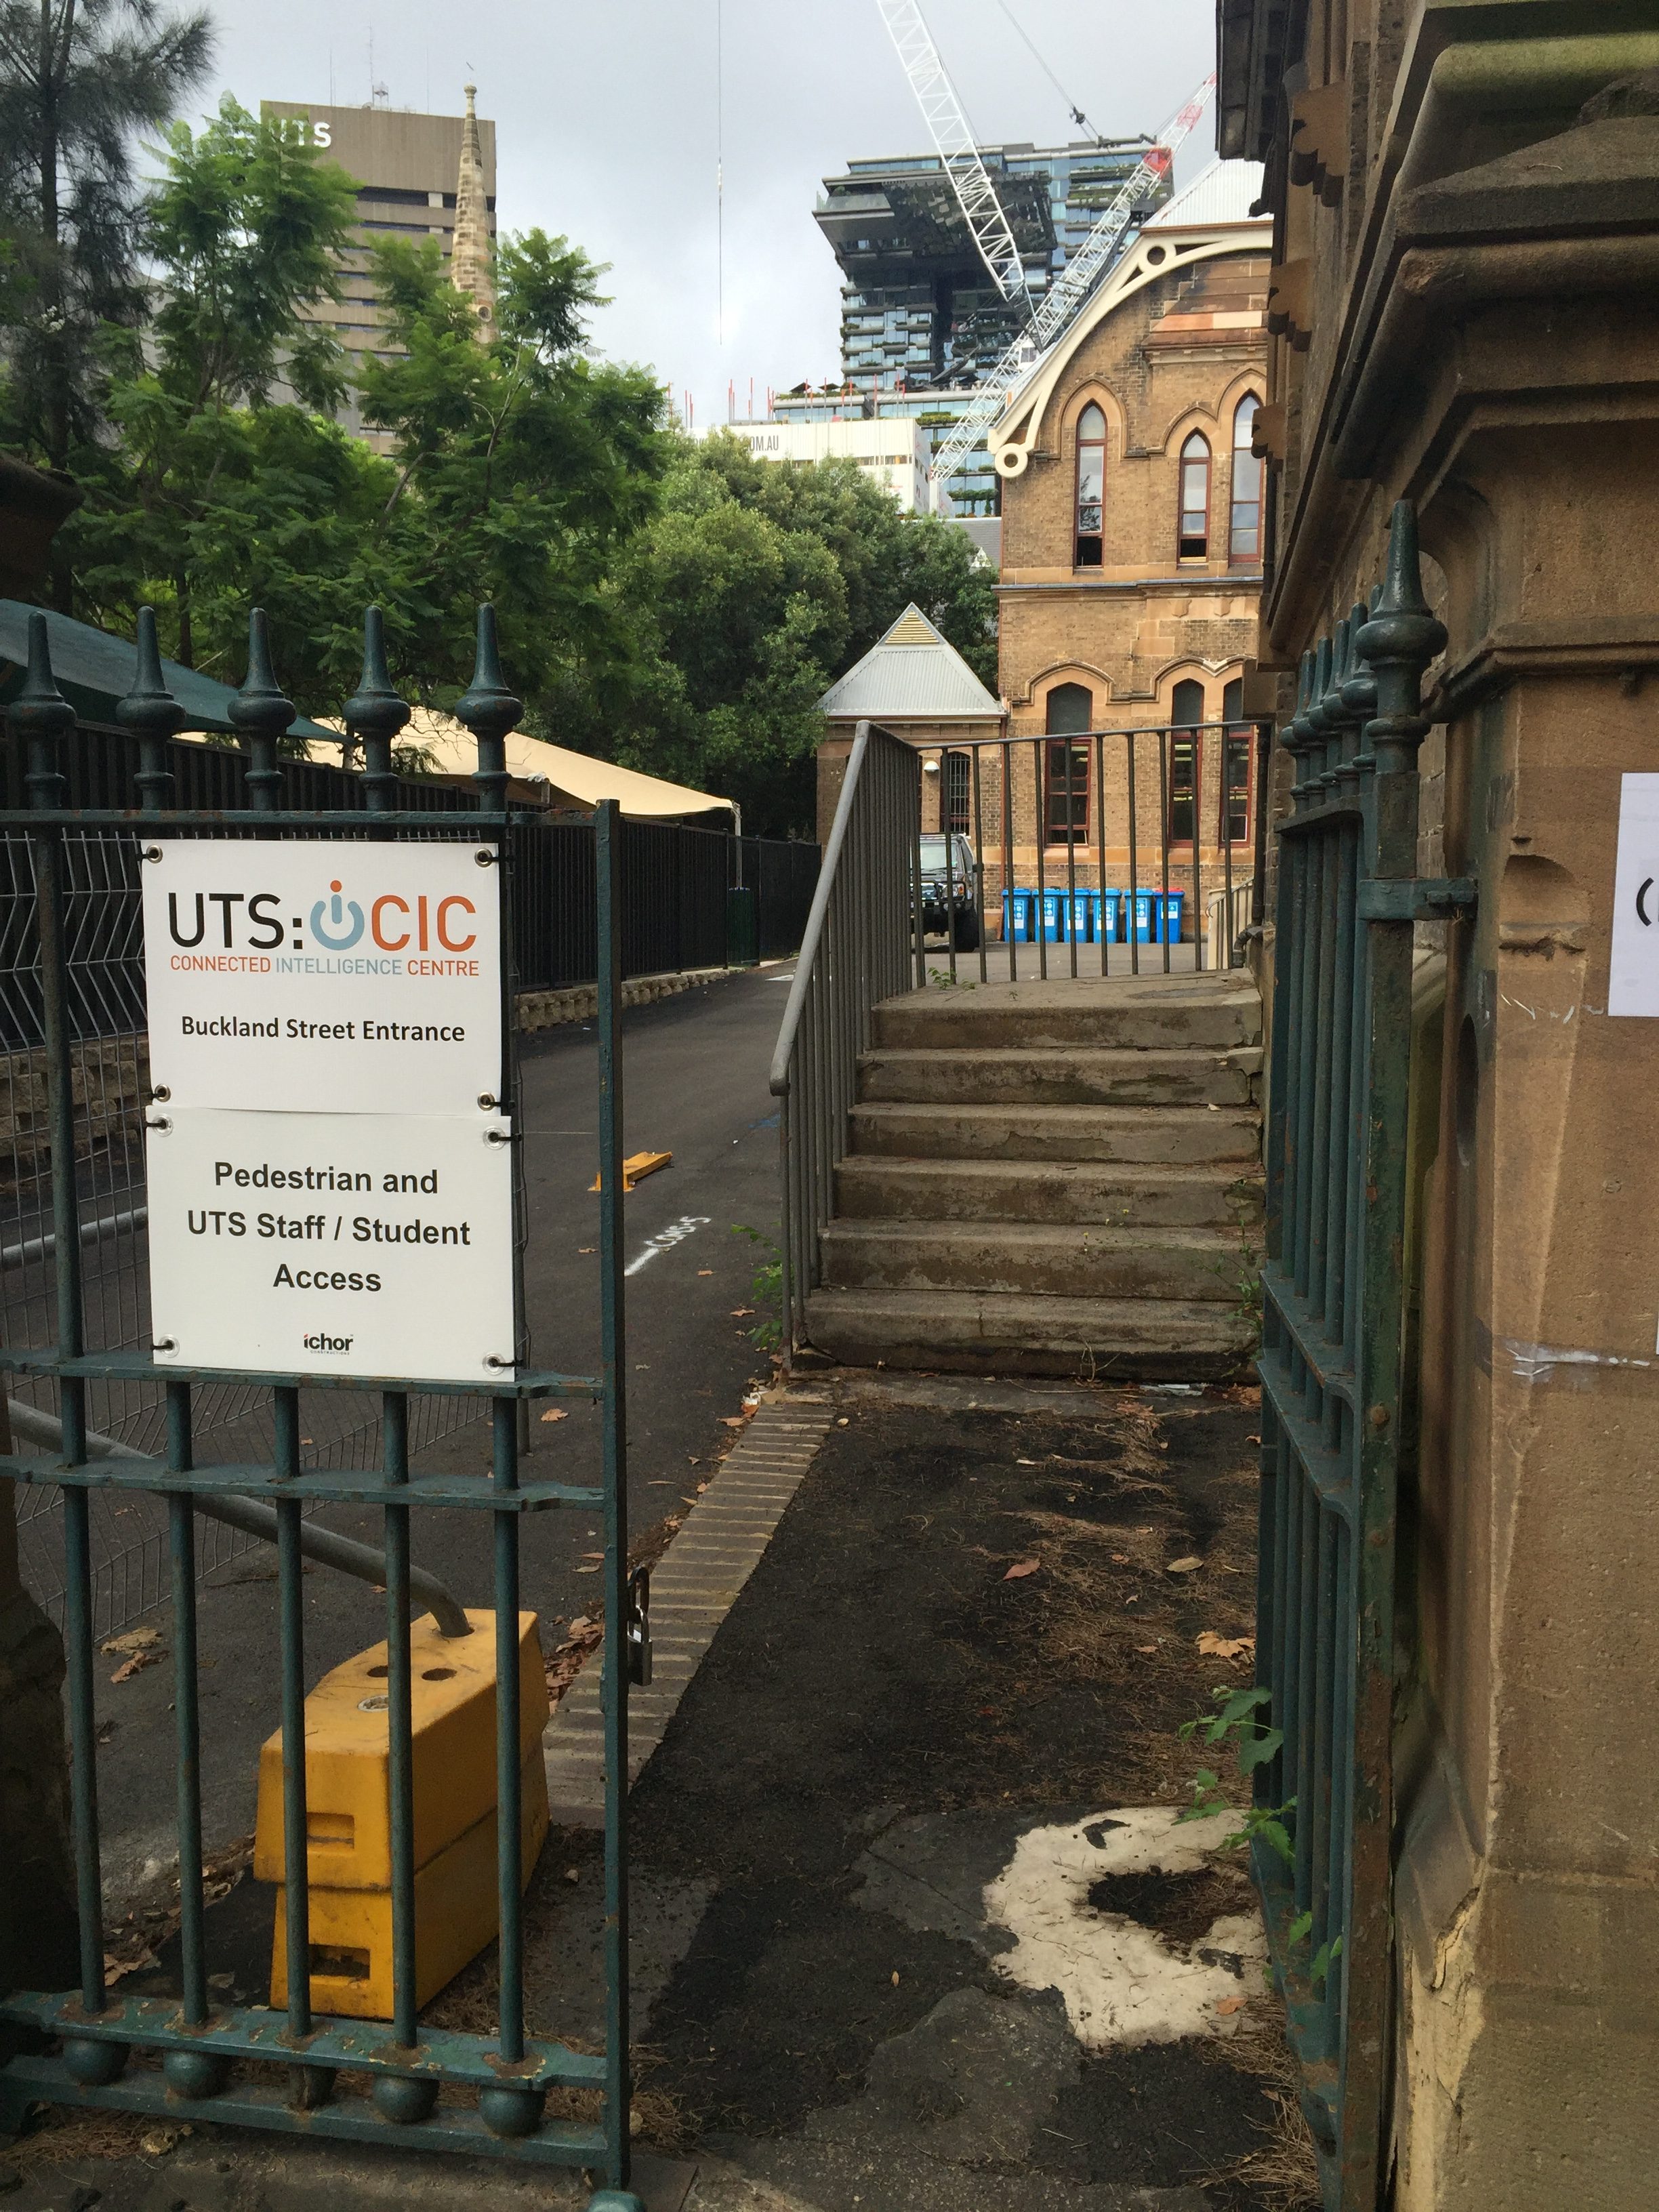 Buckland St entrance for CIC and the Blackfriars precinct